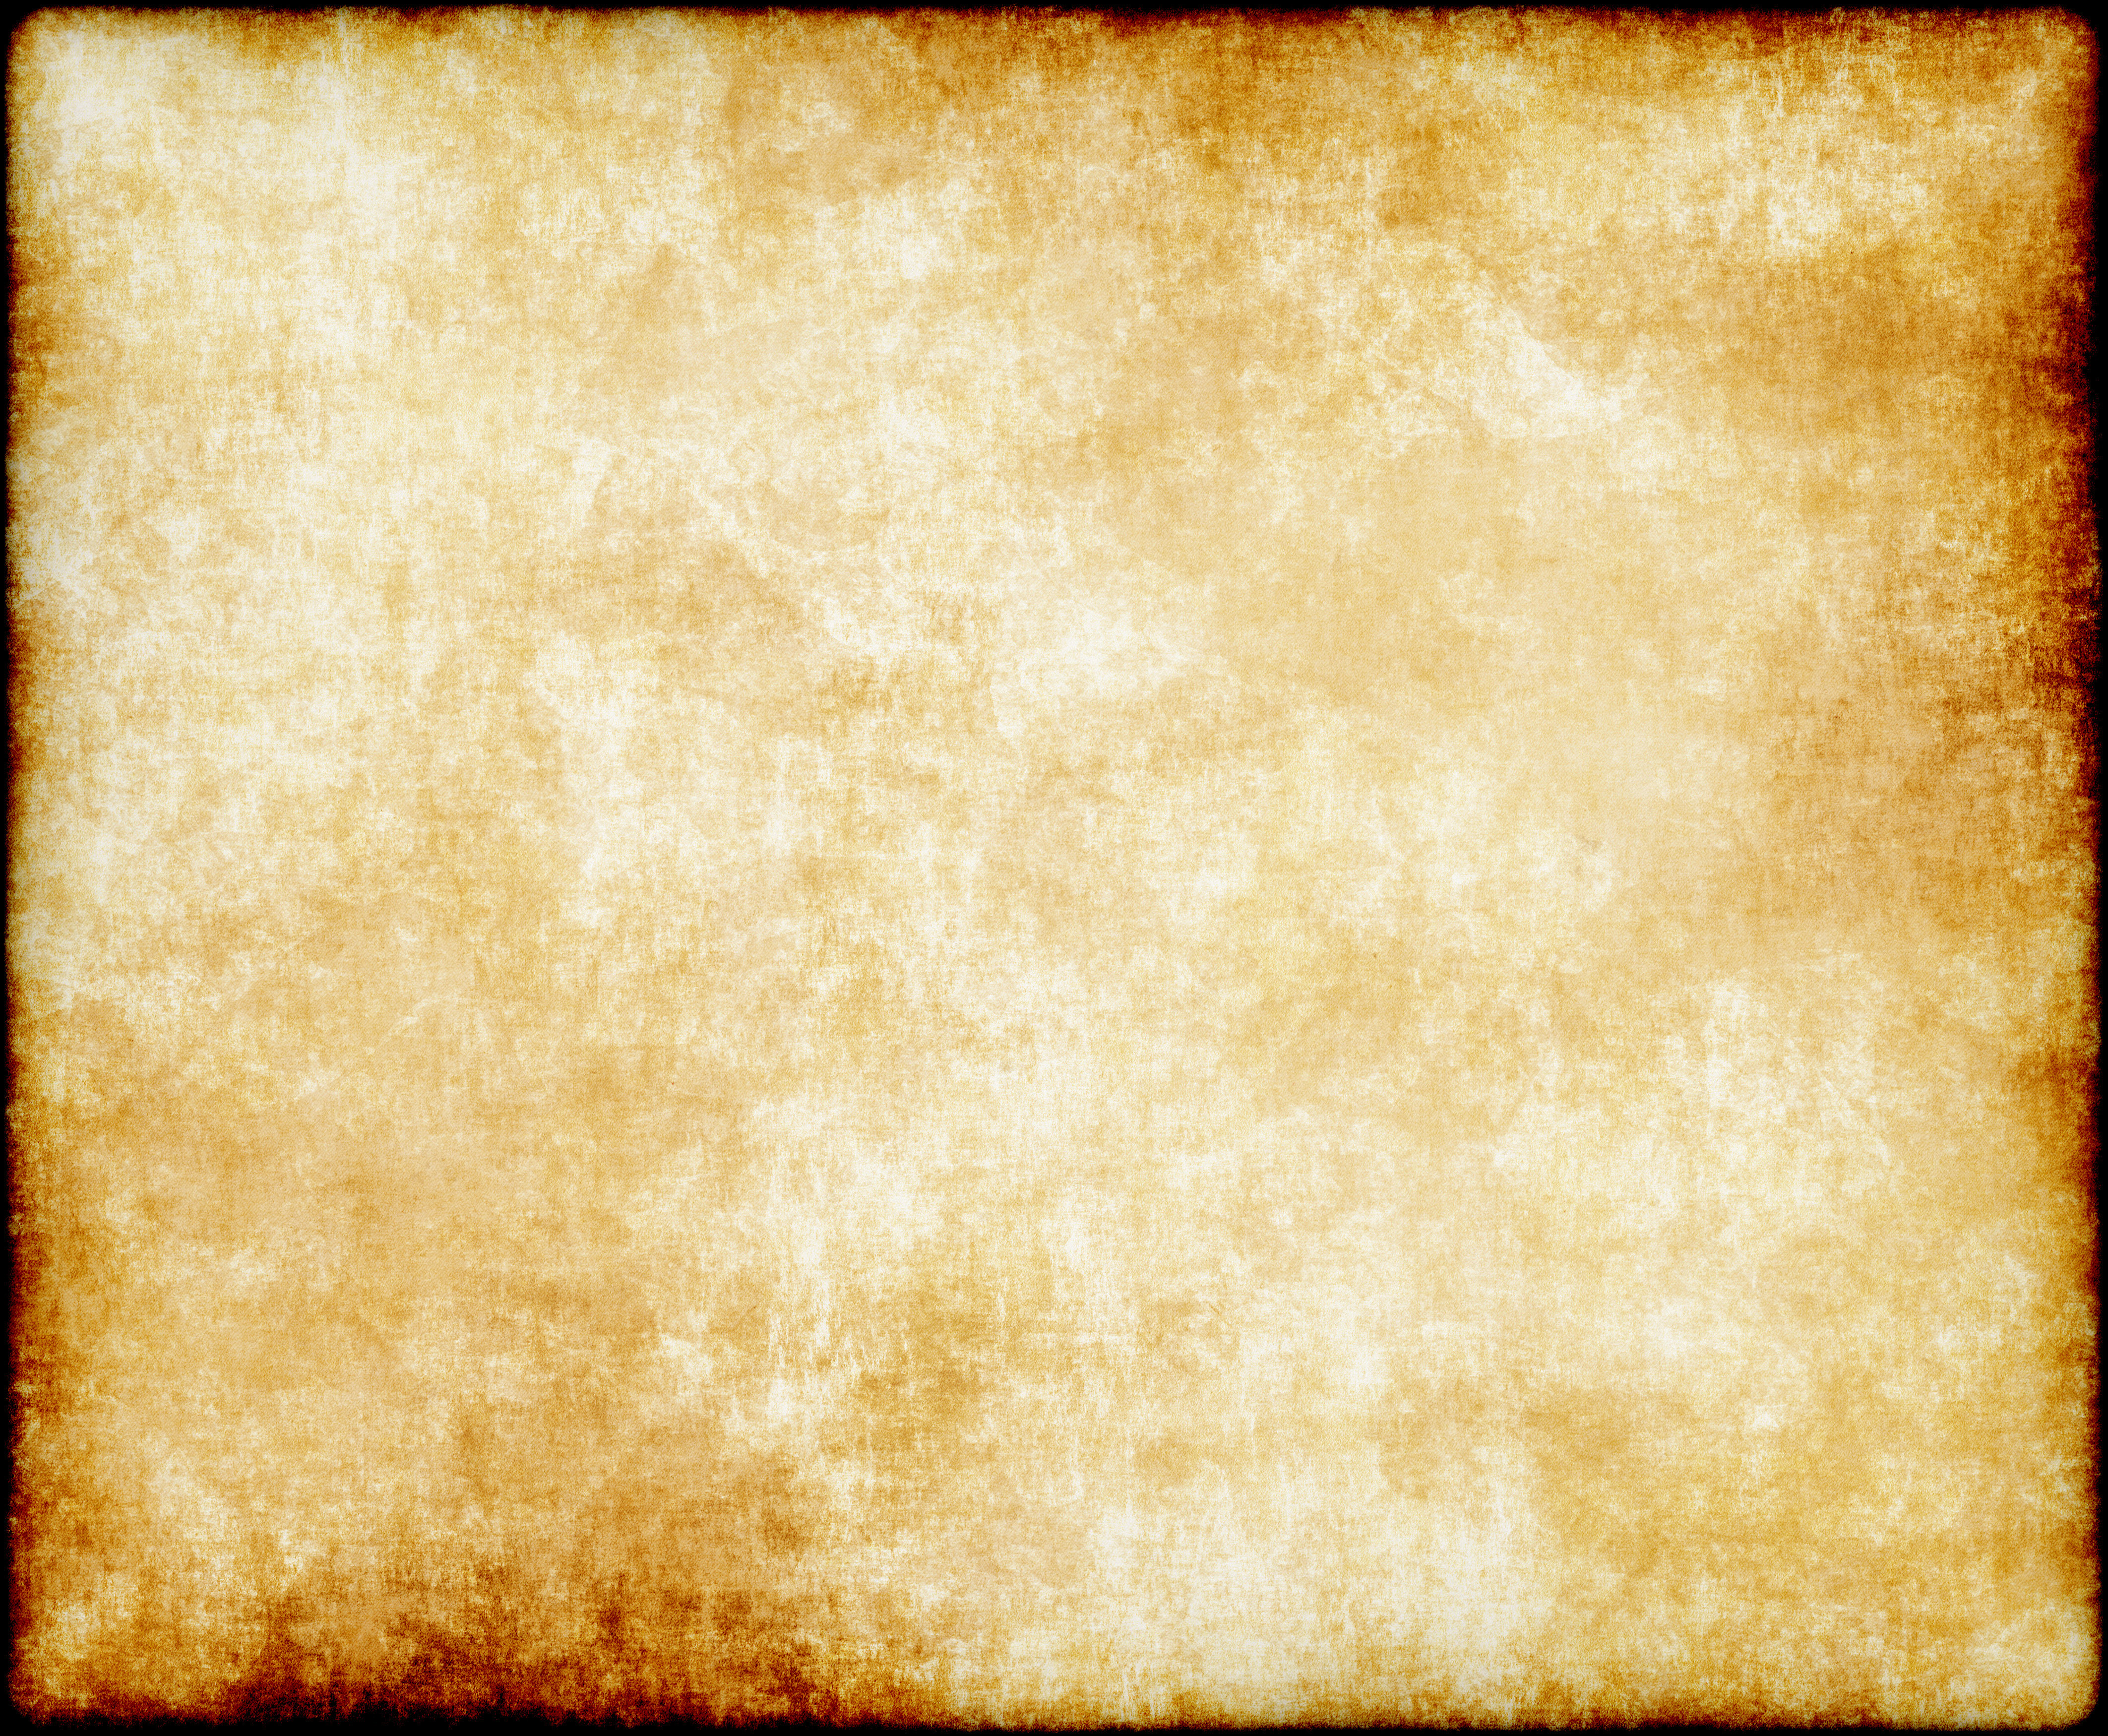 Old grungy parchment paper background texture. | www.myfreetextures.com